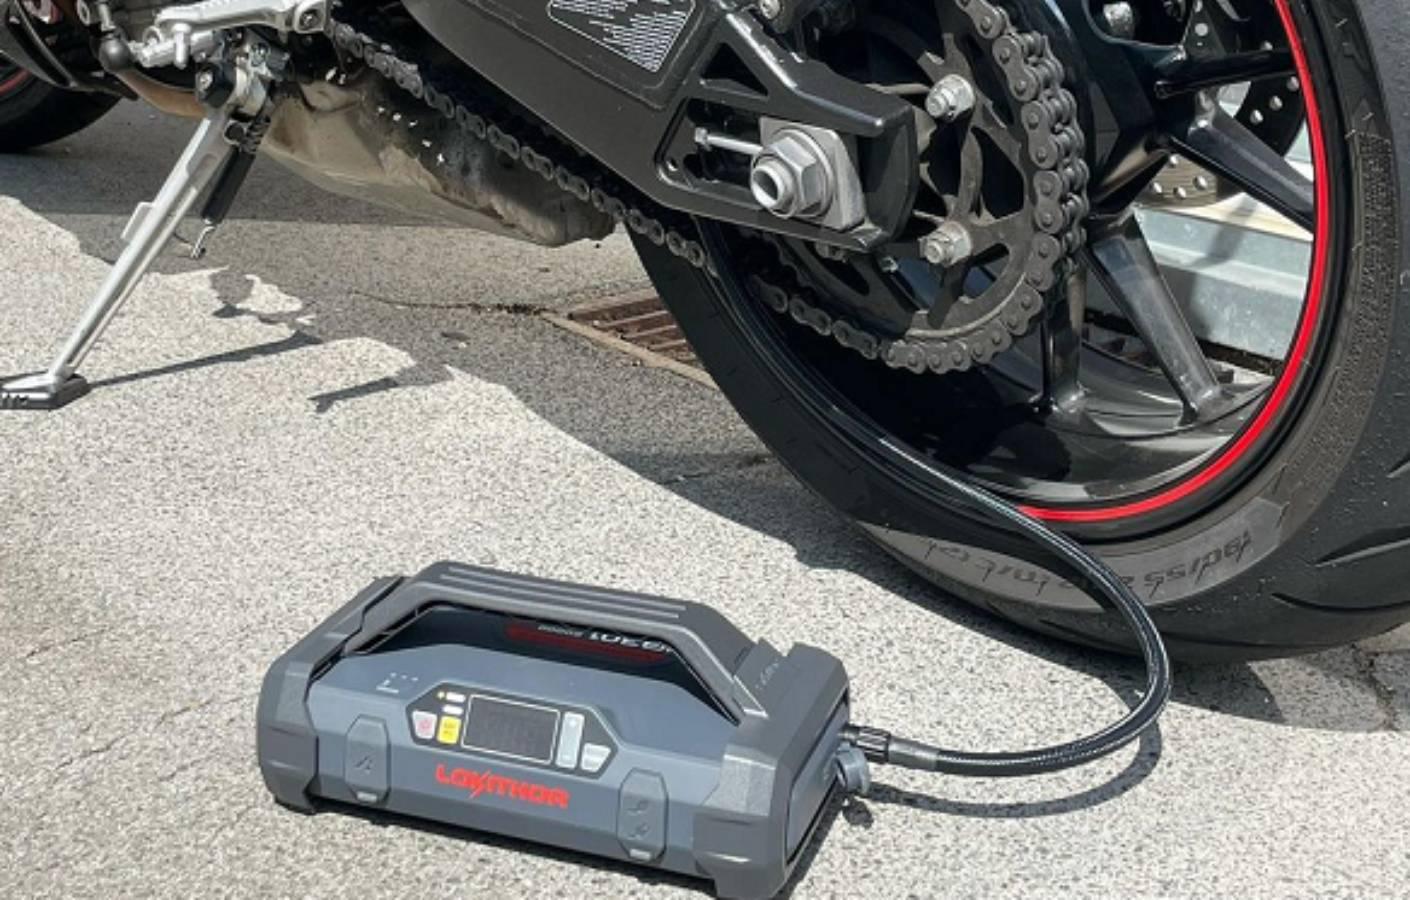 The best portable tire inflators and air compressors - Lokithorshop